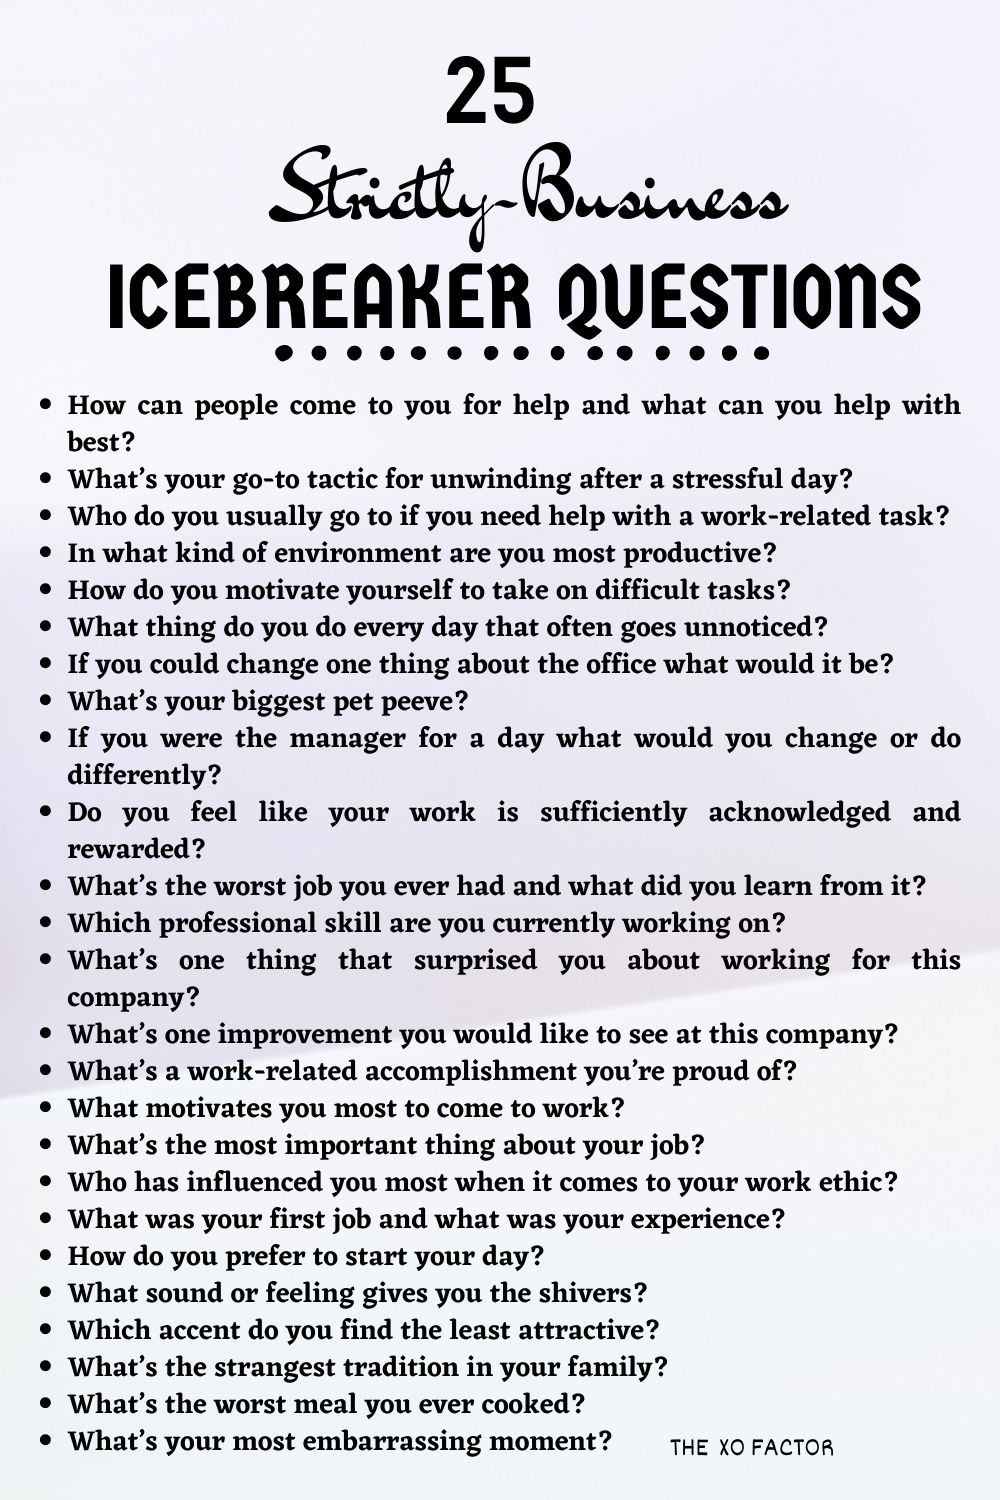 Strictly-business Icebreaker Questions